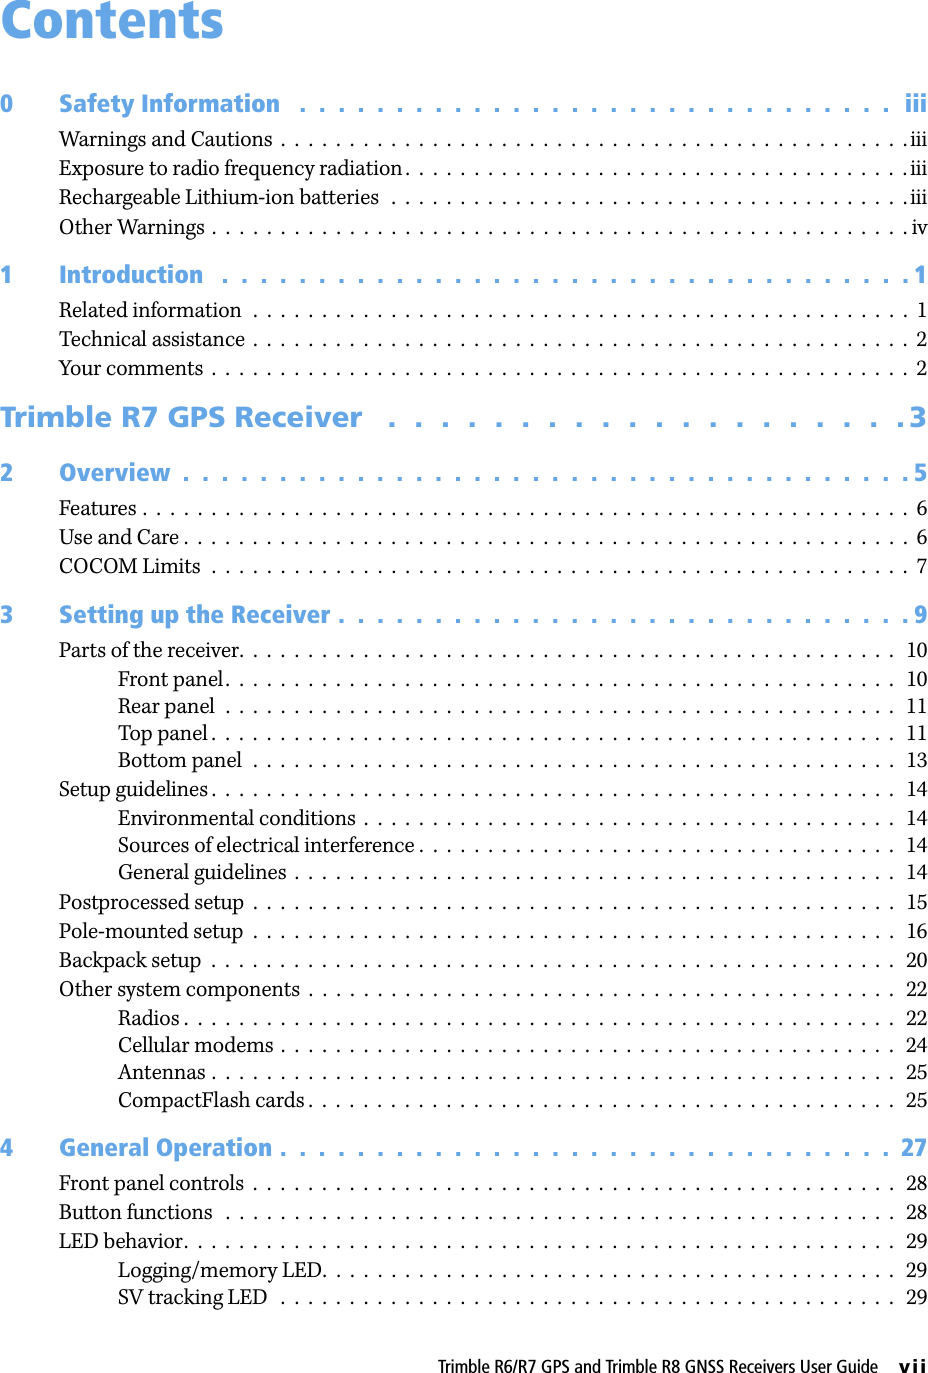 Trimble R6/R7 GPS and Trimble R8 GNSS Receivers User Guide     viiContents0 Safety Information   .  .  .  .  .  .  .  .  .  .  .  .  .  .  .  .  .  .  .  .  .  .  .  .  .  .  .  .  .  .  .  iiiWarnings and Cautions  .  .  .  .  .  .  .  .  .  .  .  .  .  .  .  .  .  .  .  .  .  .  .  .  .  .  .  .  .  .  .  .  .  .  .  .  .  .  .  .  .  .  .  .  .  . iiiExposure to radio frequency radiation.  .  .  .  .  .  .  .  .  .  .  .  .  .  .  .  .  .  .  .  .  .  .  .  .  .  .  .  .  .  .  .  .  .  .  .  . iiiRechargeable Lithium-ion batteries   .  .  .  .  .  .  .  .  .  .  .  .  .  .  .  .  .  .  .  .  .  .  .  .  .  .  .  .  .  .  .  .  .  .  .  .  .  . iiiOther Warnings .  .  .  .  .  .  .  .  .  .  .  .  .  .  .  .  .  .  .  .  .  .  .  .  .  .  .  .  .  .  .  .  .  .  .  .  .  .  .  .  .  .  .  .  .  .  .  .  .  .  . iv1 Introduction   .  .  .  .  .  .  .  .  .  .  .  .  .  .  .  .  .  .  .  .  .  .  .  .  .  .  .  .  .  .  .  .  .  .  .  . 1Related information  .  .  .  .  .  .  .  .  .  .  .  .  .  .  .  .  .  .  .  .  .  .  .  .  .  .  .  .  .  .  .  .  .  .  .  .  .  .  .  .  .  .  .  .  .  .  .  .  1Technical assistance  .  .  .  .  .  .  .  .  .  .  .  .  .  .  .  .  .  .  .  .  .  .  .  .  .  .  .  .  .  .  .  .  .  .  .  .  .  .  .  .  .  .  .  .  .  .  .  .  2Your comments  .  .  .  .  .  .  .  .  .  .  .  .  .  .  .  .  .  .  .  .  .  .  .  .  .  .  .  .  .  .  .  .  .  .  .  .  .  .  .  .  .  .  .  .  .  .  .  .  .  .  .  2Trimble R7 GPS Receiver   .  .  .  .  .  .  .  .  .  .  .  .  .  .  .  .  .  .  .  . 32 Overview  .  .  .  .  .  .  .  .  .  .  .  .  .  .  .  .  .  .  .  .  .  .  .  .  .  .  .  .  .  .  .  .  .  .  .  .  .  . 5Features .  .  .  .  .  .  .  .  .  .  .  .  .  .  .  .  .  .  .  .  .  .  .  .  .  .  .  .  .  .  .  .  .  .  .  .  .  .  .  .  .  .  .  .  .  .  .  .  .  .  .  .  .  .  .  .  6Use and Care .  .  .  .  .  .  .  .  .  .  .  .  .  .  .  .  .  .  .  .  .  .  .  .  .  .  .  .  .  .  .  .  .  .  .  .  .  .  .  .  .  .  .  .  .  .  .  .  .  .  .  .  .  6COCOM Limits  .  .  .  .  .  .  .  .  .  .  .  .  .  .  .  .  .  .  .  .  .  .  .  .  .  .  .  .  .  .  .  .  .  .  .  .  .  .  .  .  .  .  .  .  .  .  .  .  .  .  .  73 Setting up the Receiver .  .  .  .  .  .  .  .  .  .  .  .  .  .  .  .  .  .  .  .  .  .  .  .  .  .  .  .  .  . 9Parts of the receiver.  .  .  .  .  .  .  .  .  .  .  .  .  .  .  .  .  .  .  .  .  .  .  .  .  .  .  .  .  .  .  .  .  .  .  .  .  .  .  .  .  .  .  .  .  .  .  .   10Front panel.  .  .  .  .  .  .  .  .  .  .  .  .  .  .  .  .  .  .  .  .  .  .  .  .  .  .  .  .  .  .  .  .  .  .  .  .  .  .  .  .  .  .  .  .  .  .  .  .   10Rear panel  .  .  .  .  .  .  .  .  .  .  .  .  .  .  .  .  .  .  .  .  .  .  .  .  .  .  .  .  .  .  .  .  .  .  .  .  .  .  .  .  .  .  .  .  .  .  .  .  .   11Top panel .  .  .  .  .  .  .  .  .  .  .  .  .  .  .  .  .  .  .  .  .  .  .  .  .  .  .  .  .  .  .  .  .  .  .  .  .  .  .  .  .  .  .  .  .  .  .  .  .  .   11Bottom panel  .  .  .  .  .  .  .  .  .  .  .  .  .  .  .  .  .  .  .  .  .  .  .  .  .  .  .  .  .  .  .  .  .  .  .  .  .  .  .  .  .  .  .  .  .  .  .   13Setup guidelines .  .  .  .  .  .  .  .  .  .  .  .  .  .  .  .  .  .  .  .  .  .  .  .  .  .  .  .  .  .  .  .  .  .  .  .  .  .  .  .  .  .  .  .  .  .  .  .  .  .   14Environmental conditions  .  .  .  .  .  .  .  .  .  .  .  .  .  .  .  .  .  .  .  .  .  .  .  .  .  .  .  .  .  .  .  .  .  .  .  .  .  .  .   14Sources of electrical interference .  .  .  .  .  .  .  .  .  .  .  .  .  .  .  .  .  .  .  .  .  .  .  .  .  .  .  .  .  .  .  .  .  .  .   14General guidelines  .  .  .  .  .  .  .  .  .  .  .  .  .  .  .  .  .  .  .  .  .  .  .  .  .  .  .  .  .  .  .  .  .  .  .  .  .  .  .  .  .  .  .  .   14Postprocessed setup  .  .  .  .  .  .  .  .  .  .  .  .  .  .  .  .  .  .  .  .  .  .  .  .  .  .  .  .  .  .  .  .  .  .  .  .  .  .  .  .  .  .  .  .  .  .  .   15Pole-mounted setup  .  .  .  .  .  .  .  .  .  .  .  .  .  .  .  .  .  .  .  .  .  .  .  .  .  .  .  .  .  .  .  .  .  .  .  .  .  .  .  .  .  .  .  .  .  .  .   16Backpack setup  .  .  .  .  .  .  .  .  .  .  .  .  .  .  .  .  .  .  .  .  .  .  .  .  .  .  .  .  .  .  .  .  .  .  .  .  .  .  .  .  .  .  .  .  .  .  .  .  .  .   20Other system components  .  .  .  .  .  .  .  .  .  .  .  .  .  .  .  .  .  .  .  .  .  .  .  .  .  .  .  .  .  .  .  .  .  .  .  .  .  .  .  .  .  .  .   22Radios .  .  .  .  .  .  .  .  .  .  .  .  .  .  .  .  .  .  .  .  .  .  .  .  .  .  .  .  .  .  .  .  .  .  .  .  .  .  .  .  .  .  .  .  .  .  .  .  .  .  .  .   22Cellular modems  .  .  .  .  .  .  .  .  .  .  .  .  .  .  .  .  .  .  .  .  .  .  .  .  .  .  .  .  .  .  .  .  .  .  .  .  .  .  .  .  .  .  .  .  .   24Antennas .  .  .  .  .  .  .  .  .  .  .  .  .  .  .  .  .  .  .  .  .  .  .  .  .  .  .  .  .  .  .  .  .  .  .  .  .  .  .  .  .  .  .  .  .  .  .  .  .  .   25CompactFlash cards .  .  .  .  .  .  .  .  .  .  .  .  .  .  .  .  .  .  .  .  .  .  .  .  .  .  .  .  .  .  .  .  .  .  .  .  .  .  .  .  .  .  .   254 General Operation .  .  .  .  .  .  .  .  .  .  .  .  .  .  .  .  .  .  .  .  .  .  .  .  .  .  .  .  .  .  .  .  27Front panel controls  .  .  .  .  .  .  .  .  .  .  .  .  .  .  .  .  .  .  .  .  .  .  .  .  .  .  .  .  .  .  .  .  .  .  .  .  .  .  .  .  .  .  .  .  .  .  .   28Button functions   .  .  .  .  .  .  .  .  .  .  .  .  .  .  .  .  .  .  .  .  .  .  .  .  .  .  .  .  .  .  .  .  .  .  .  .  .  .  .  .  .  .  .  .  .  .  .  .  .   28LED behavior.  .  .  .  .  .  .  .  .  .  .  .  .  .  .  .  .  .  .  .  .  .  .  .  .  .  .  .  .  .  .  .  .  .  .  .  .  .  .  .  .  .  .  .  .  .  .  .  .  .  .  .   29Logging/memory LED.  .  .  .  .  .  .  .  .  .  .  .  .  .  .  .  .  .  .  .  .  .  .  .  .  .  .  .  .  .  .  .  .  .  .  .  .  .  .  .  .  .   29SV tracking LED   .  .  .  .  .  .  .  .  .  .  .  .  .  .  .  .  .  .  .  .  .  .  .  .  .  .  .  .  .  .  .  .  .  .  .  .  .  .  .  .  .  .  .  .  .   29